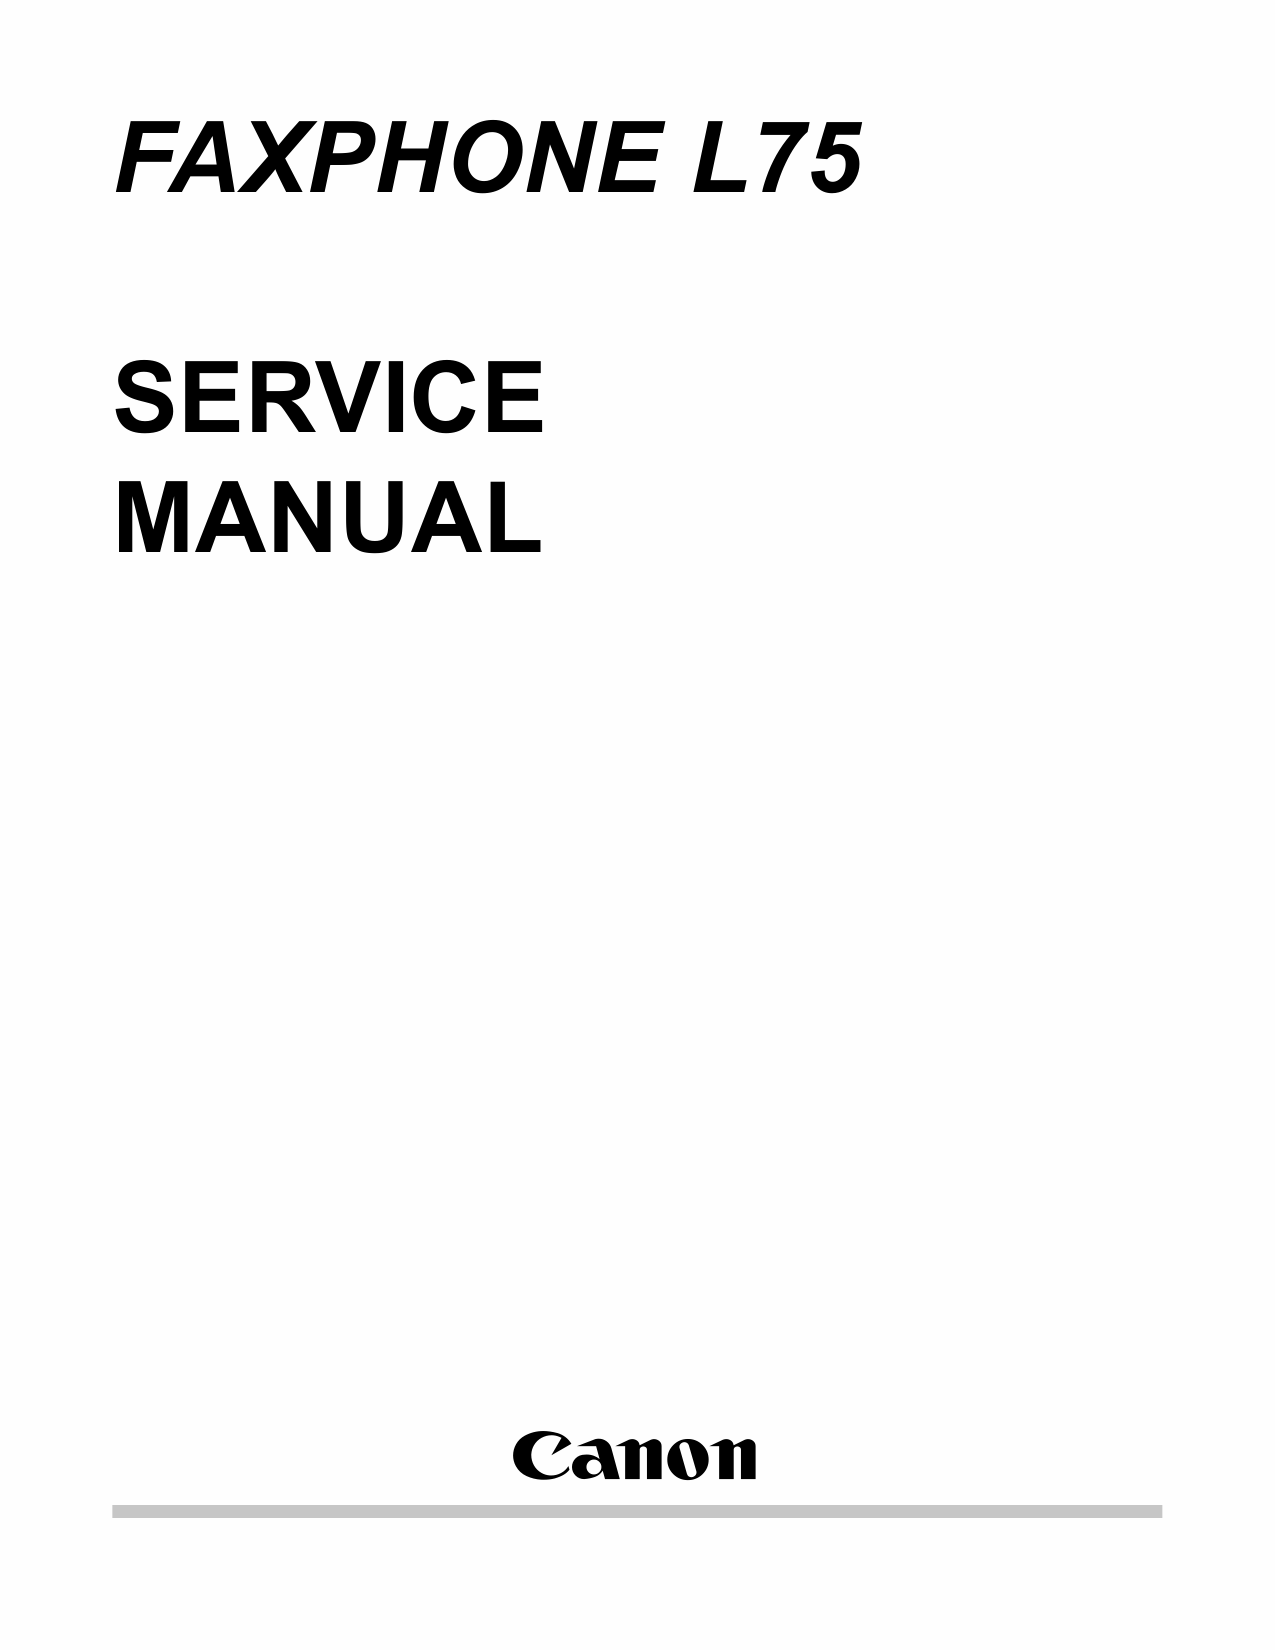 Canon FAX FP-L75 Parts and Service Manual-1